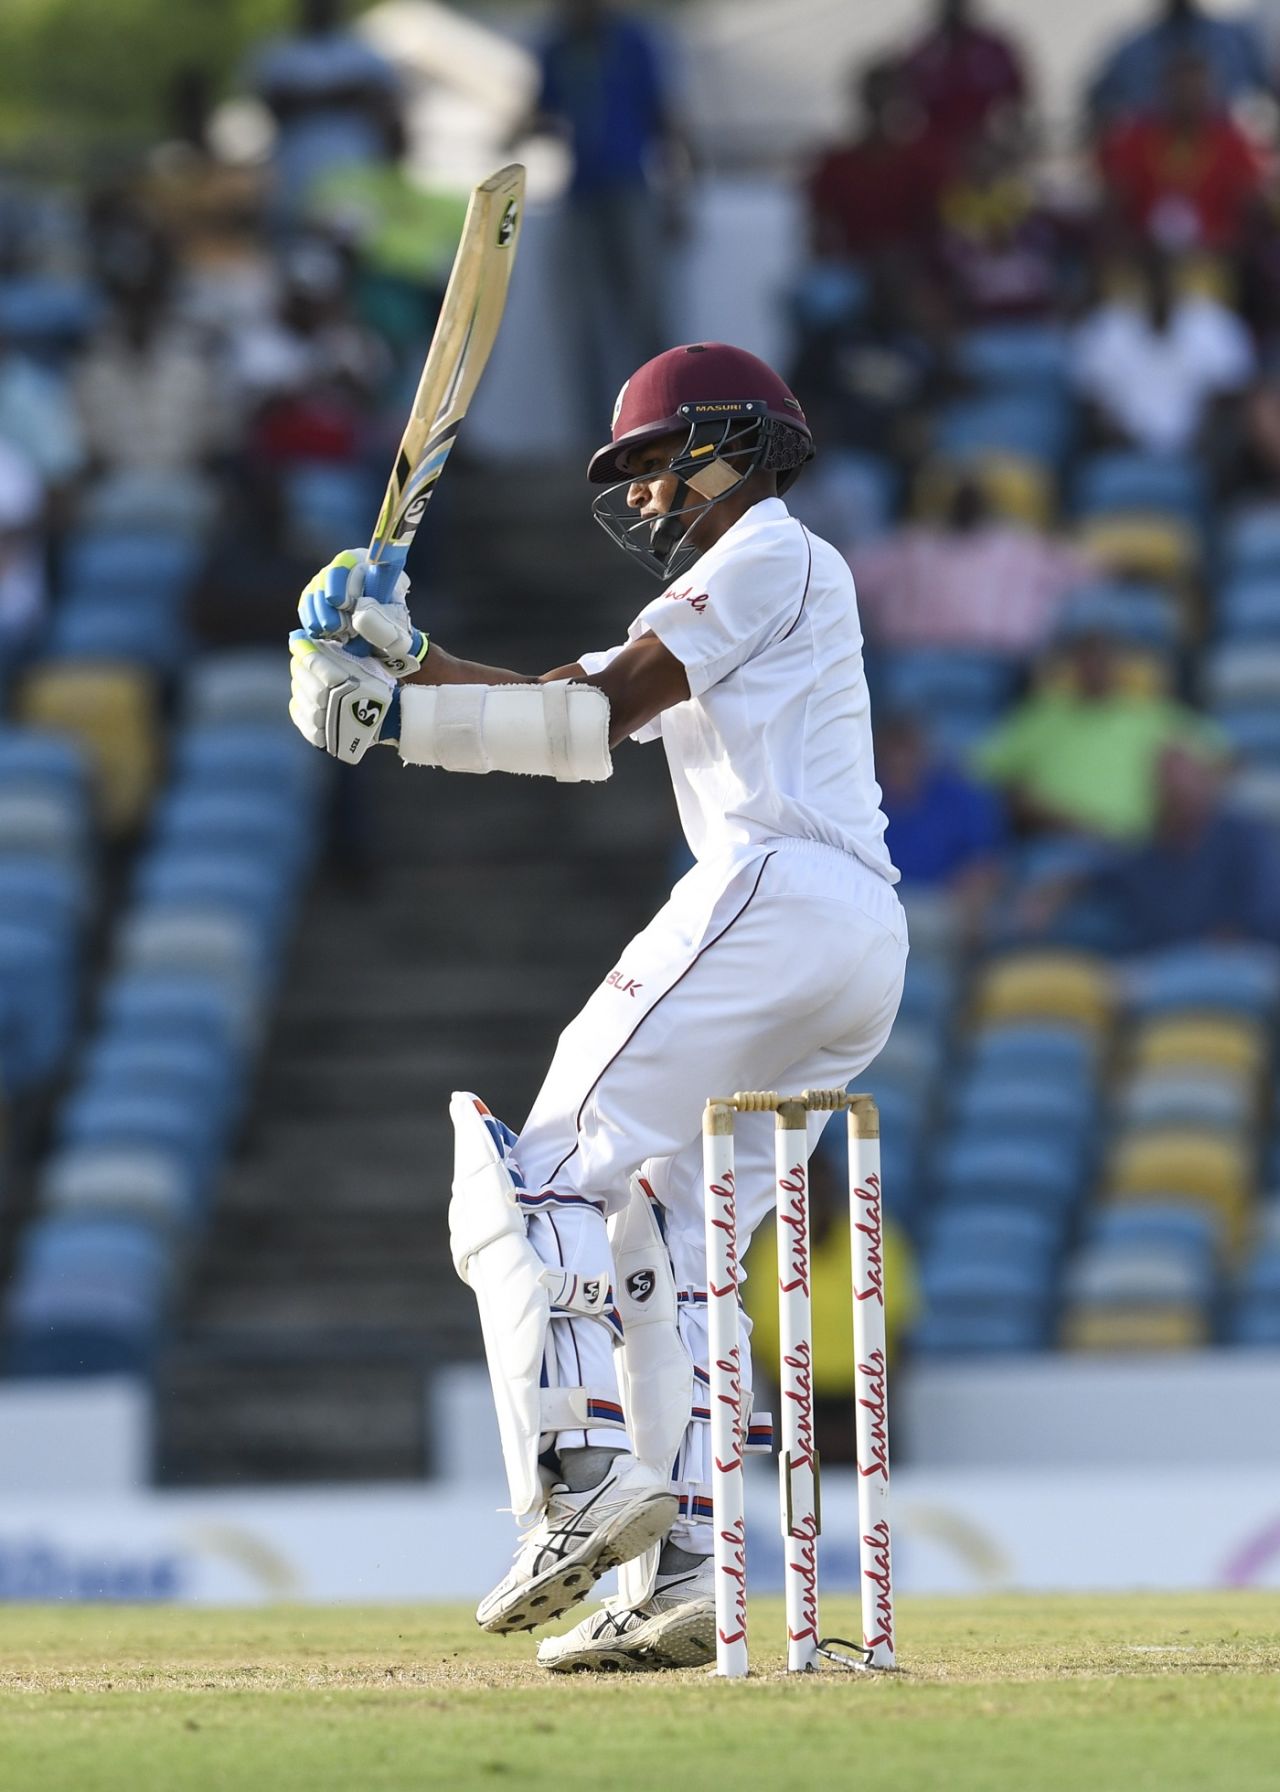 Shane Dowrich pulls the ball during his knock. West Indies v Sri Lanka, 3rd Test, Bridgetown, 2nd day, June 24, 2018